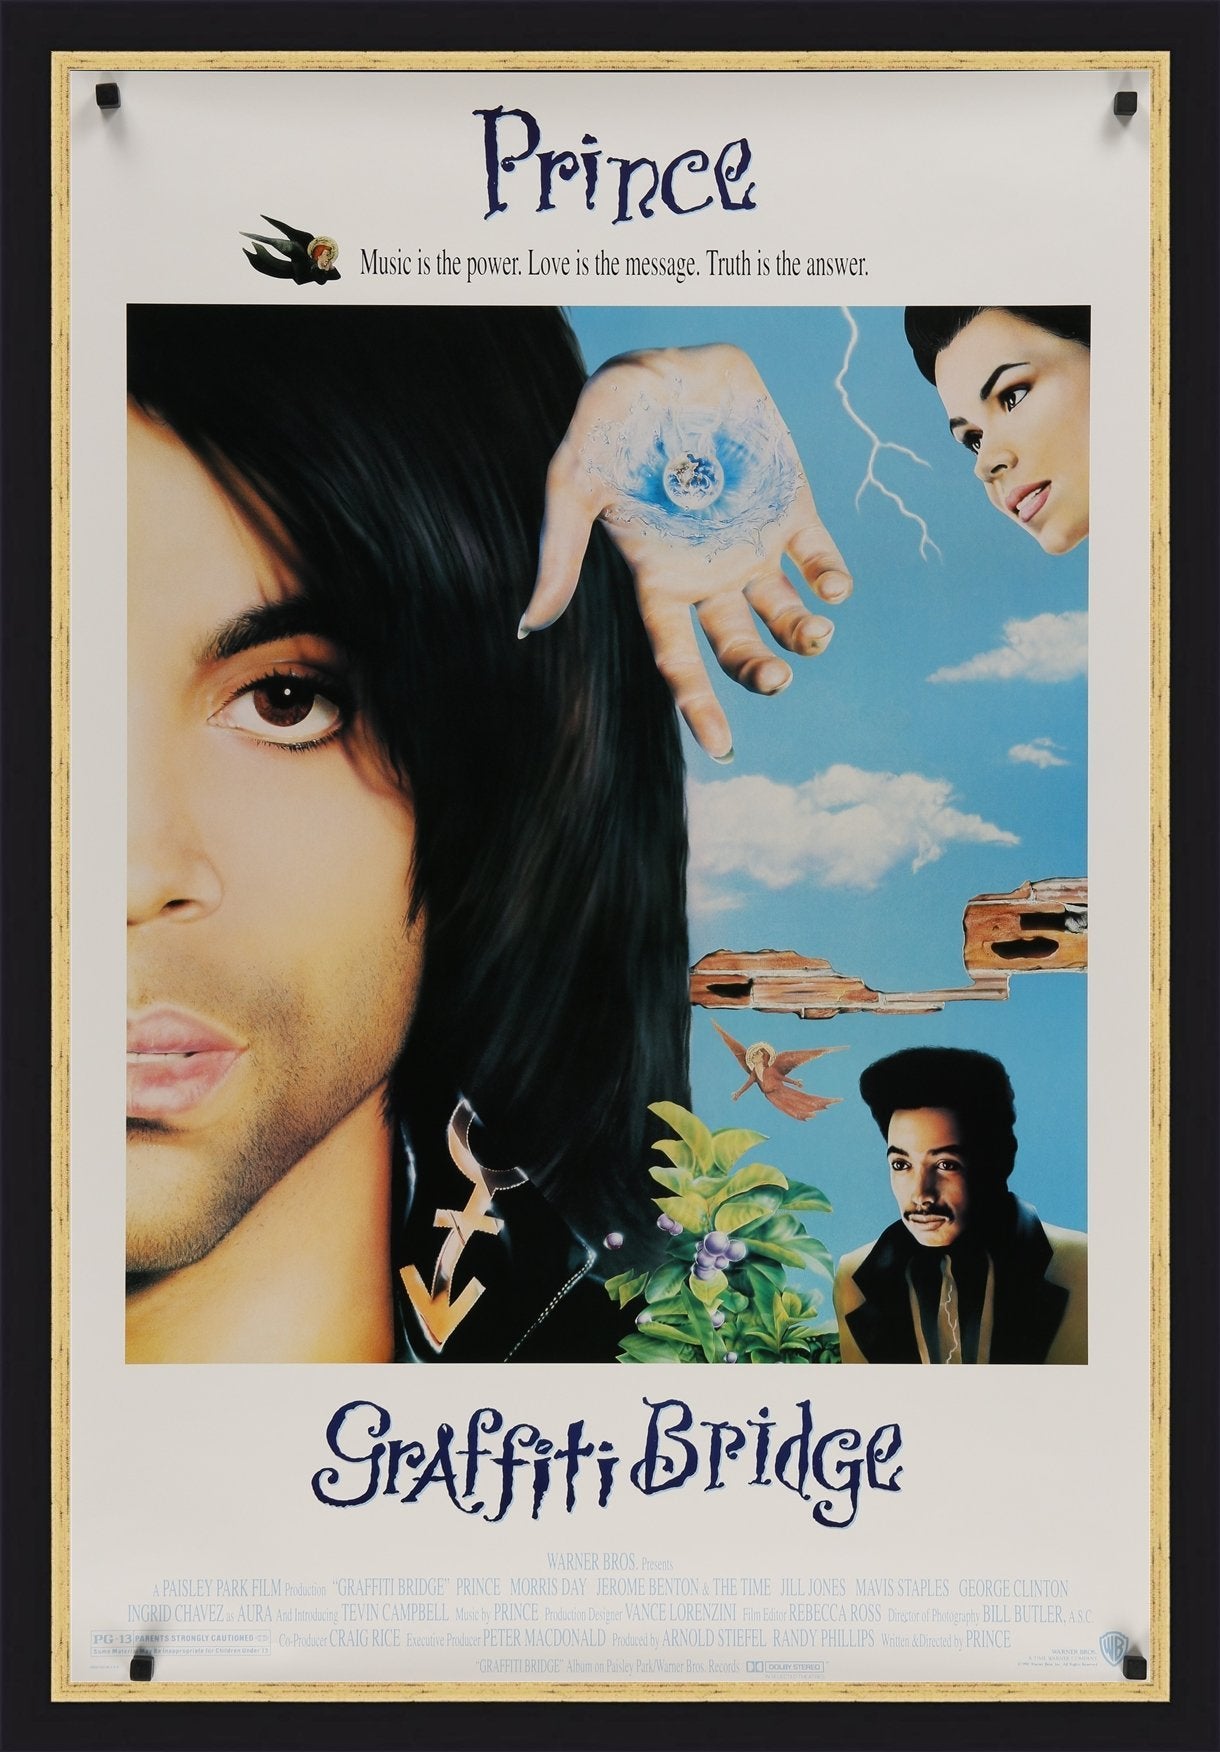 An original movie poster for the Prince film 